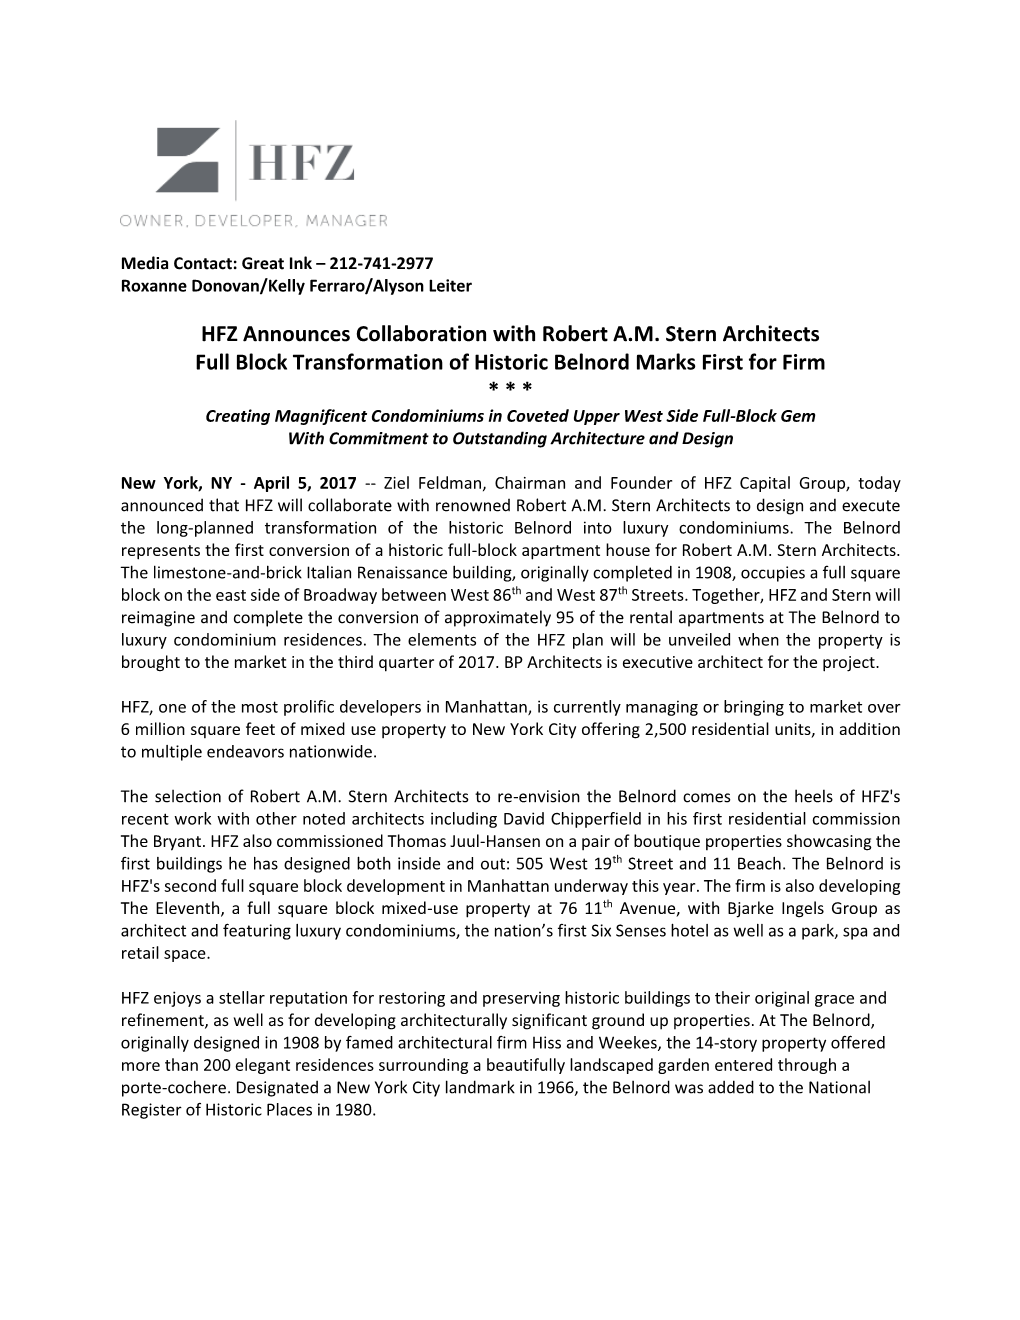 HFZ Announces Collaboration with Robert A.M. Stern Architects Full Block Transformation of Historic Belnord Marks First for Firm